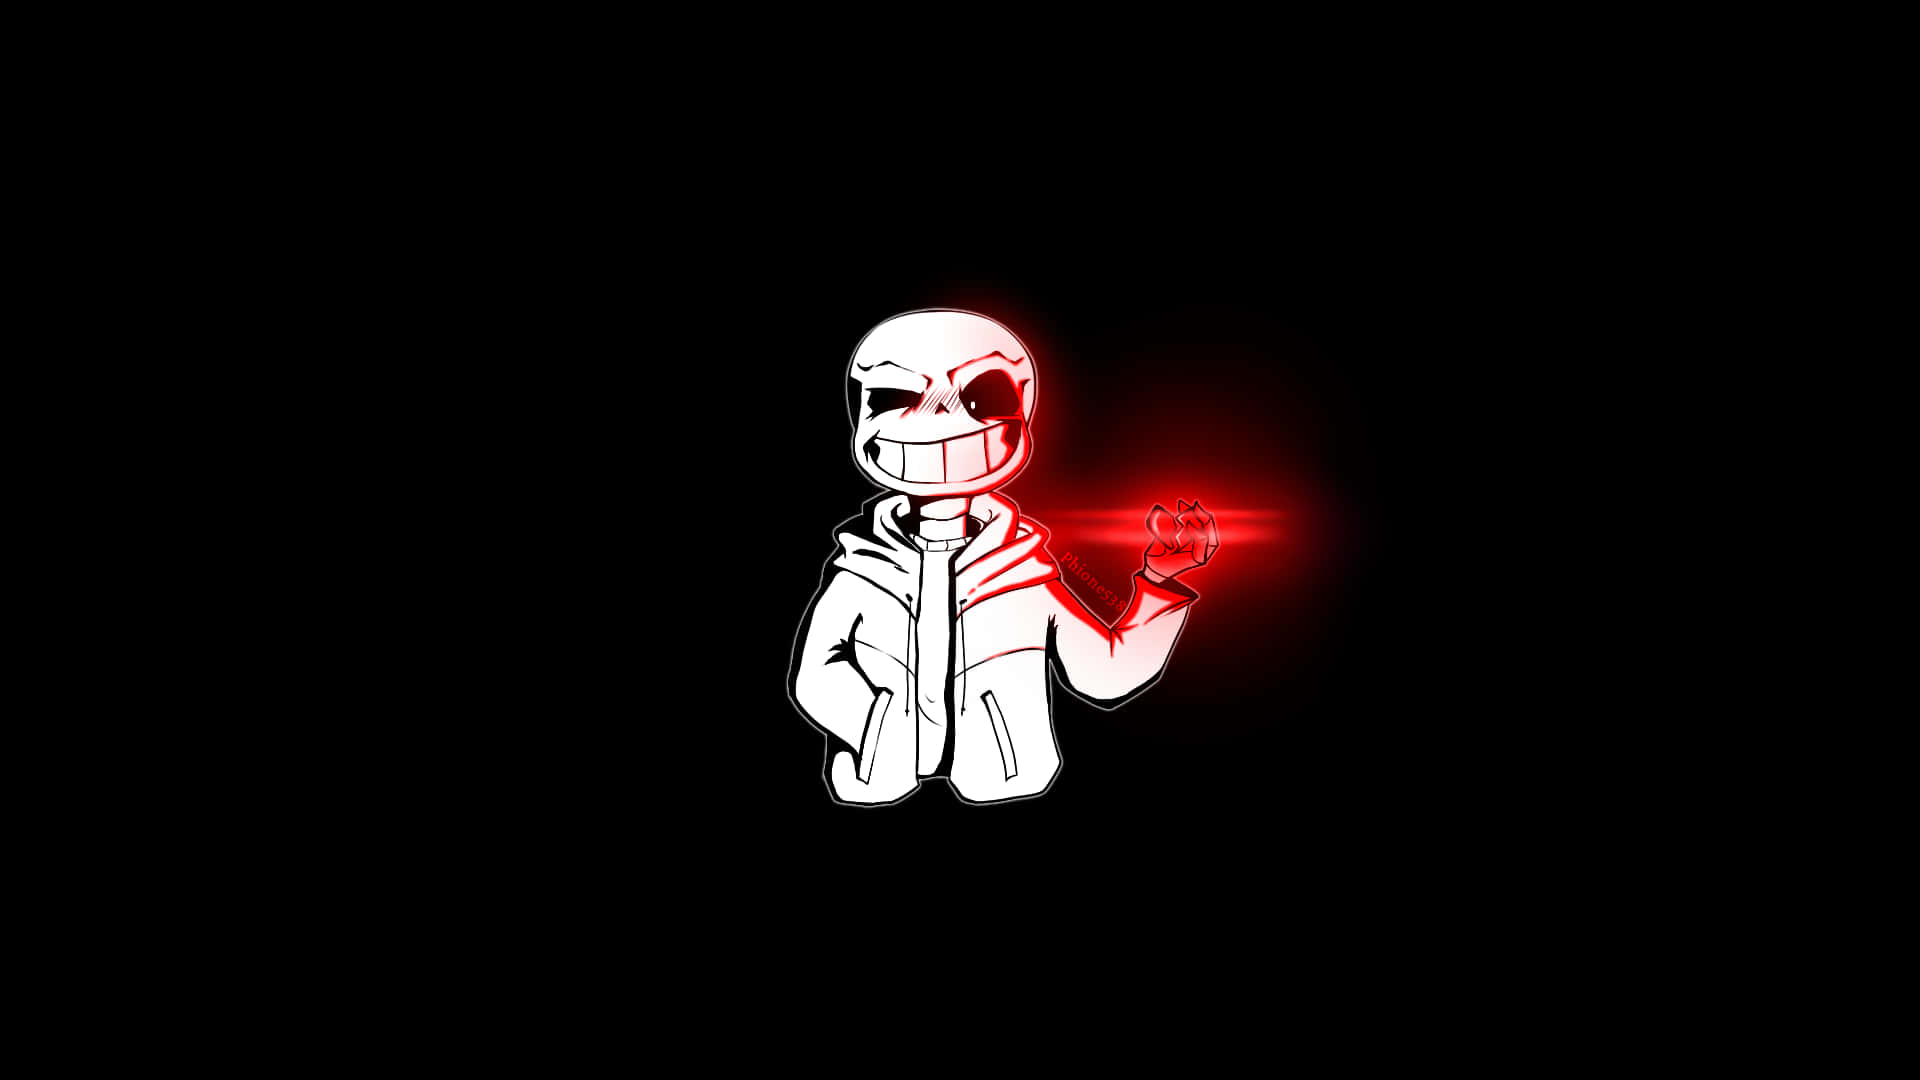 "A brave and determined fighter, Sans from Undertale" Wallpaper